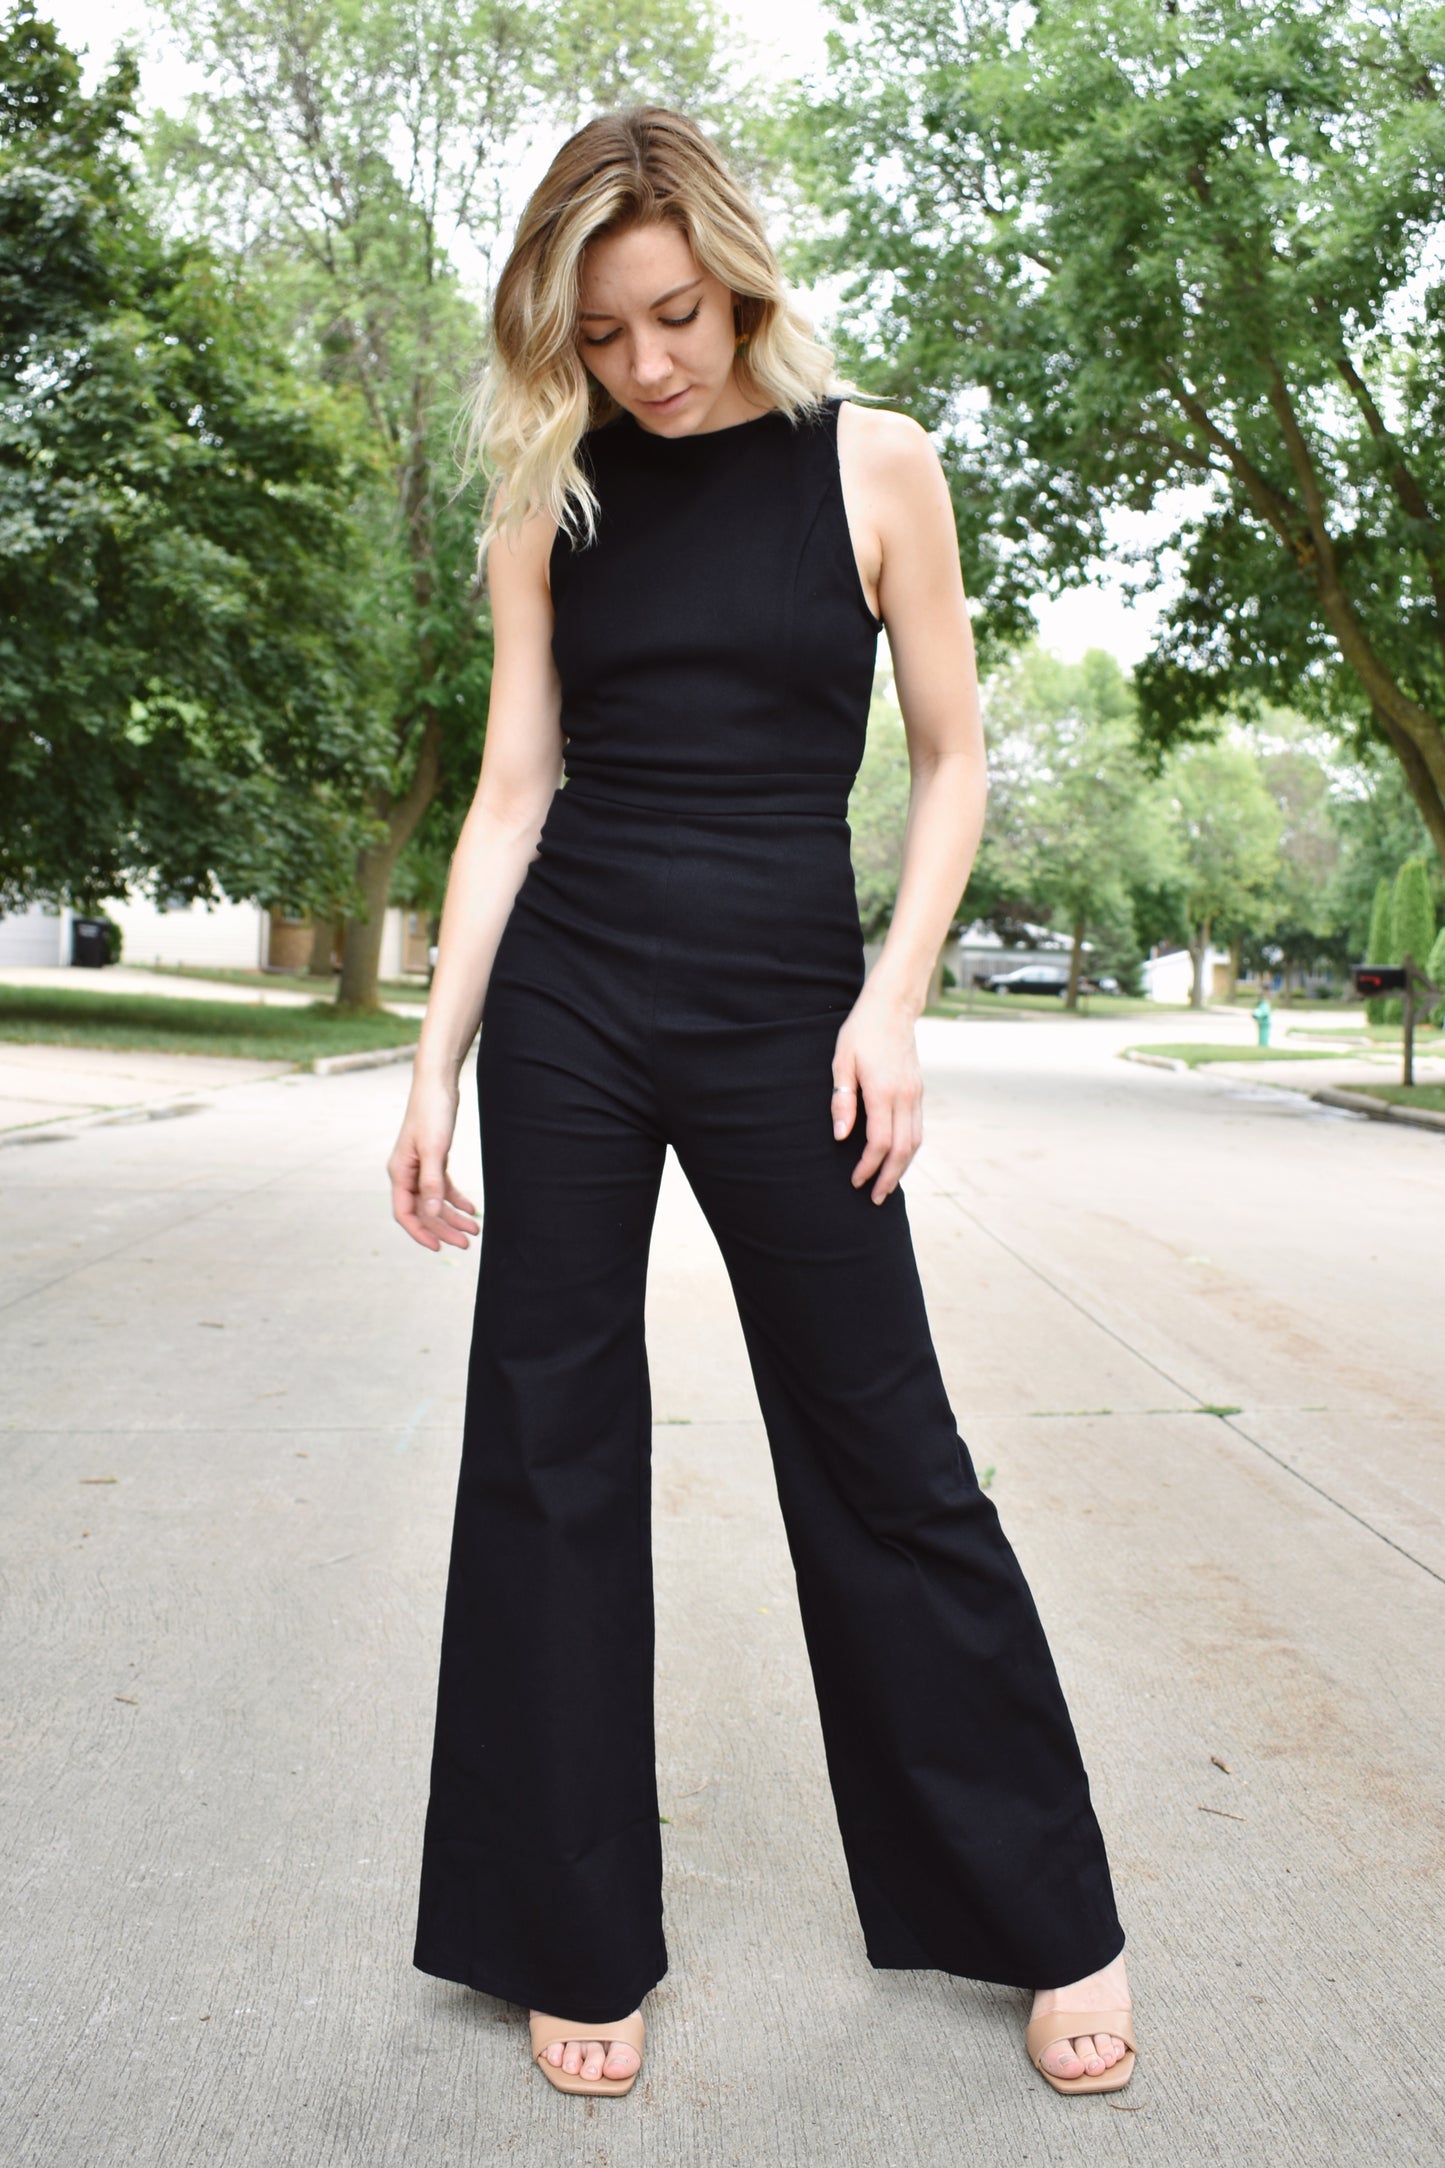 Black denim sleeveless jumpsuit with flared legs and high neck